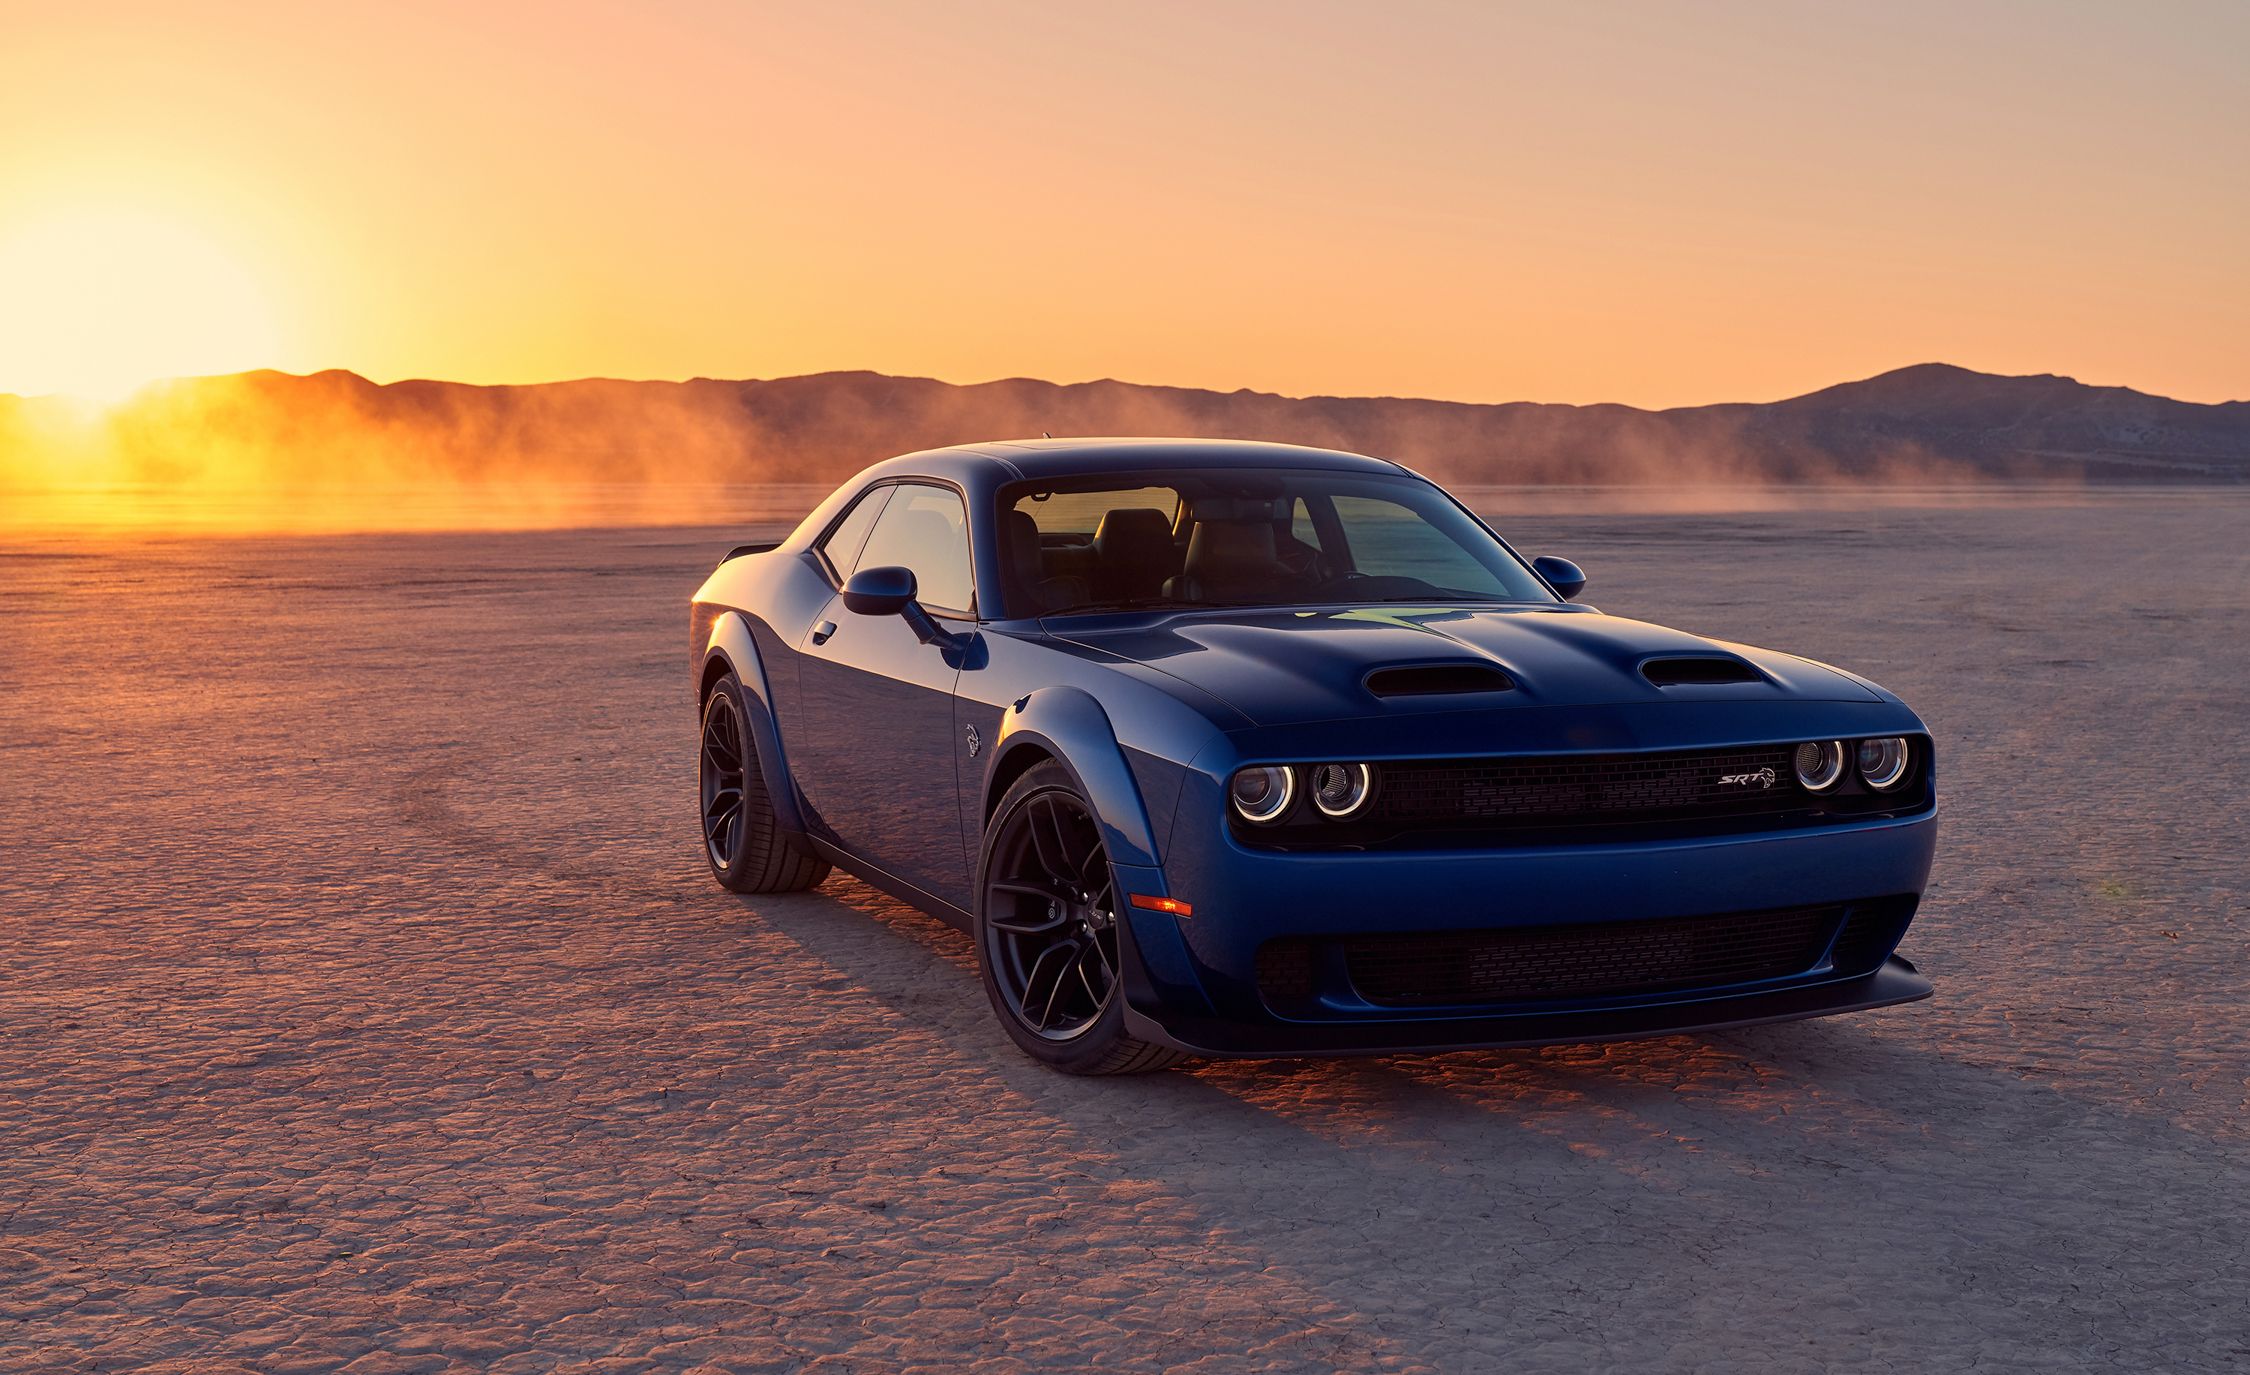 2020 Dodge Challenger Hellcat Redeye Review: Expectations Fulfilled